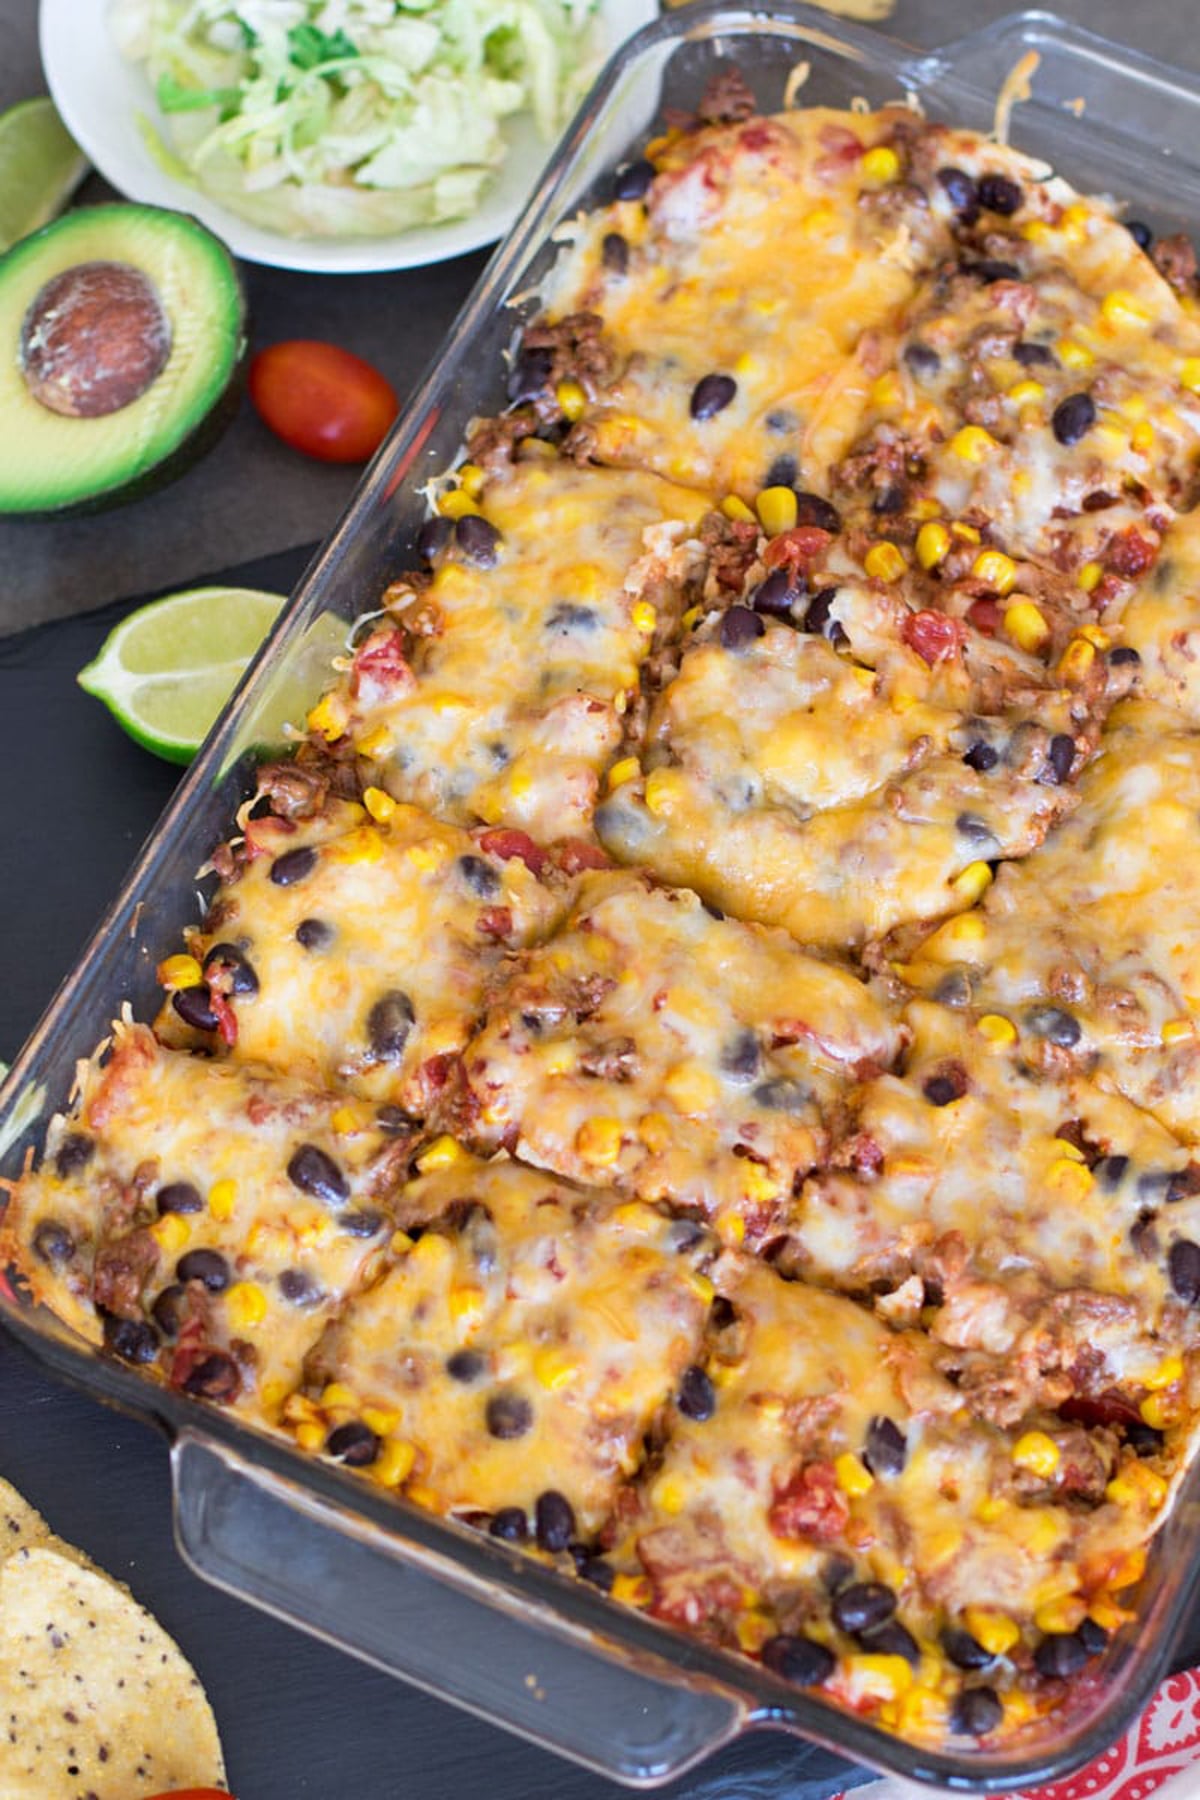 Beef enchilada casserole cut into 12 pieces, avocado, lime, and lettuce on table.